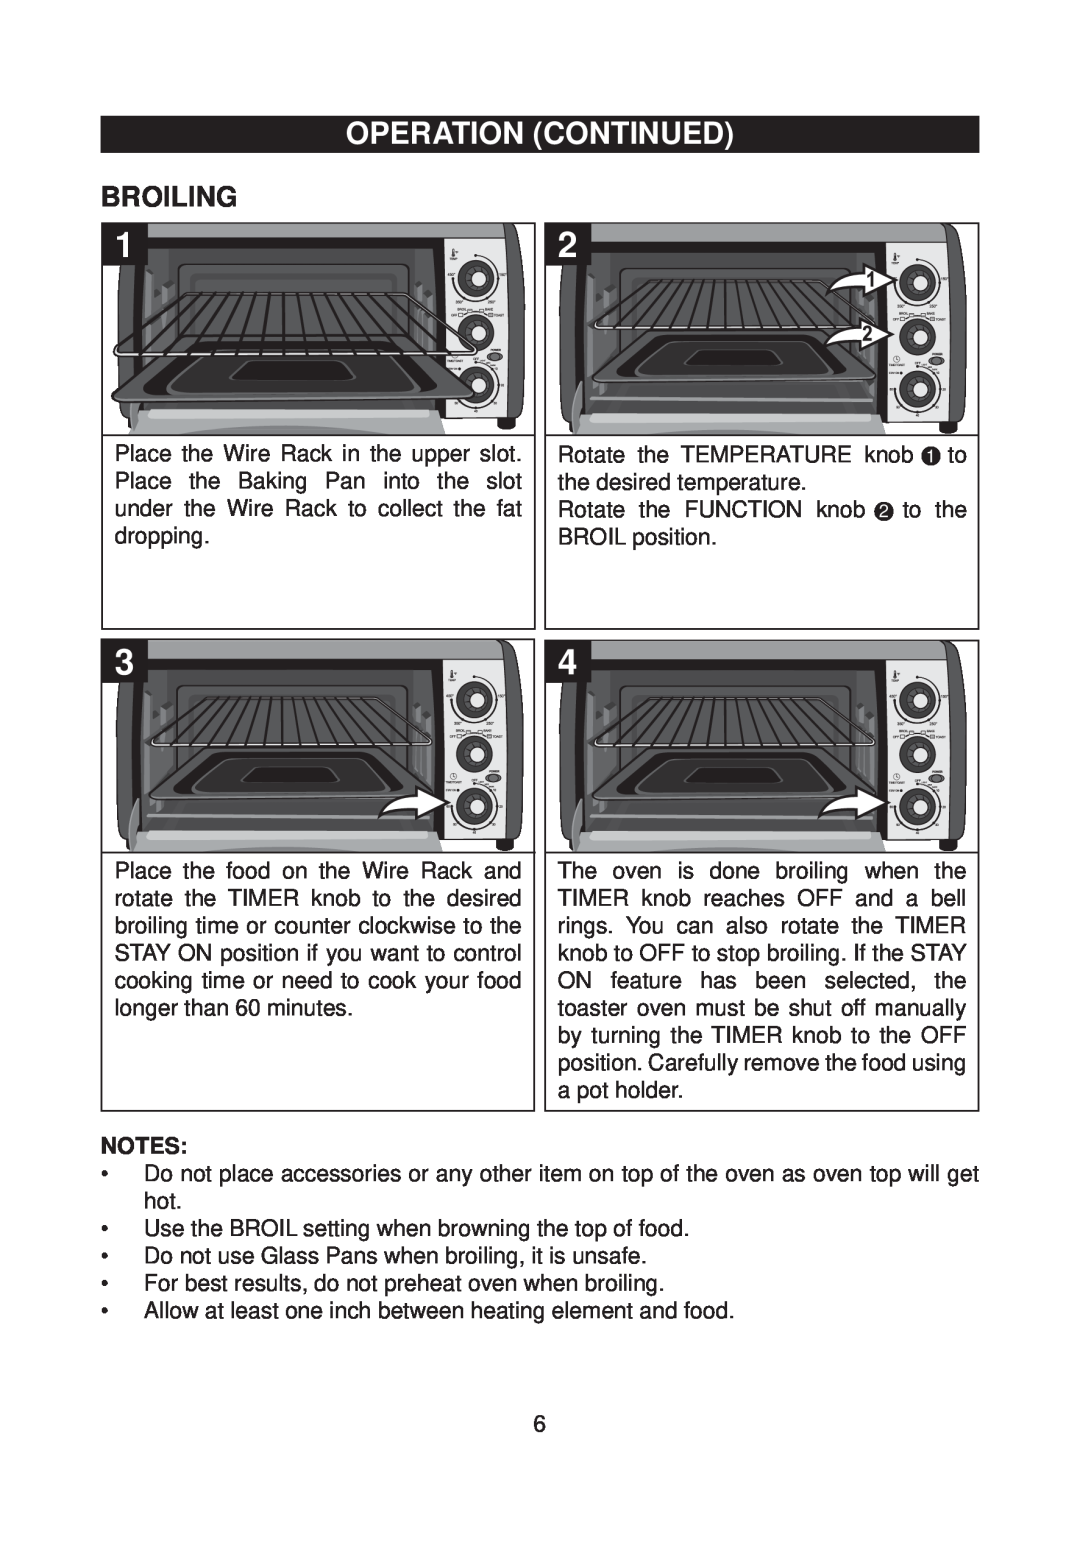 Emerson TOR59 owner manual Broiling, Operation Continued 